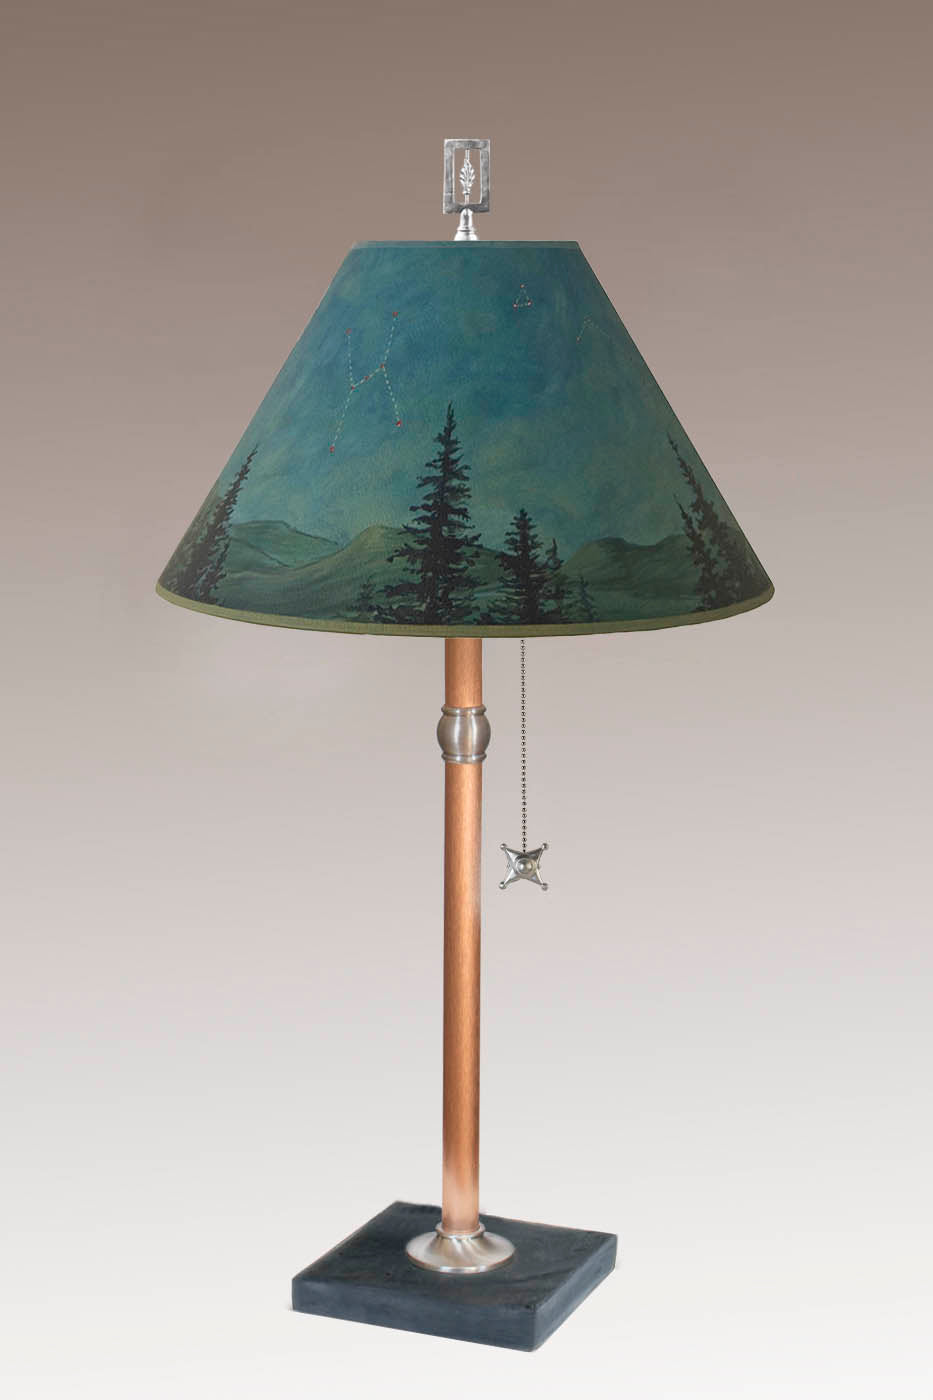 Janna Ugone & Co Table Lamps Copper Table Lamp with Medium Conical Shade in Midnight Sky